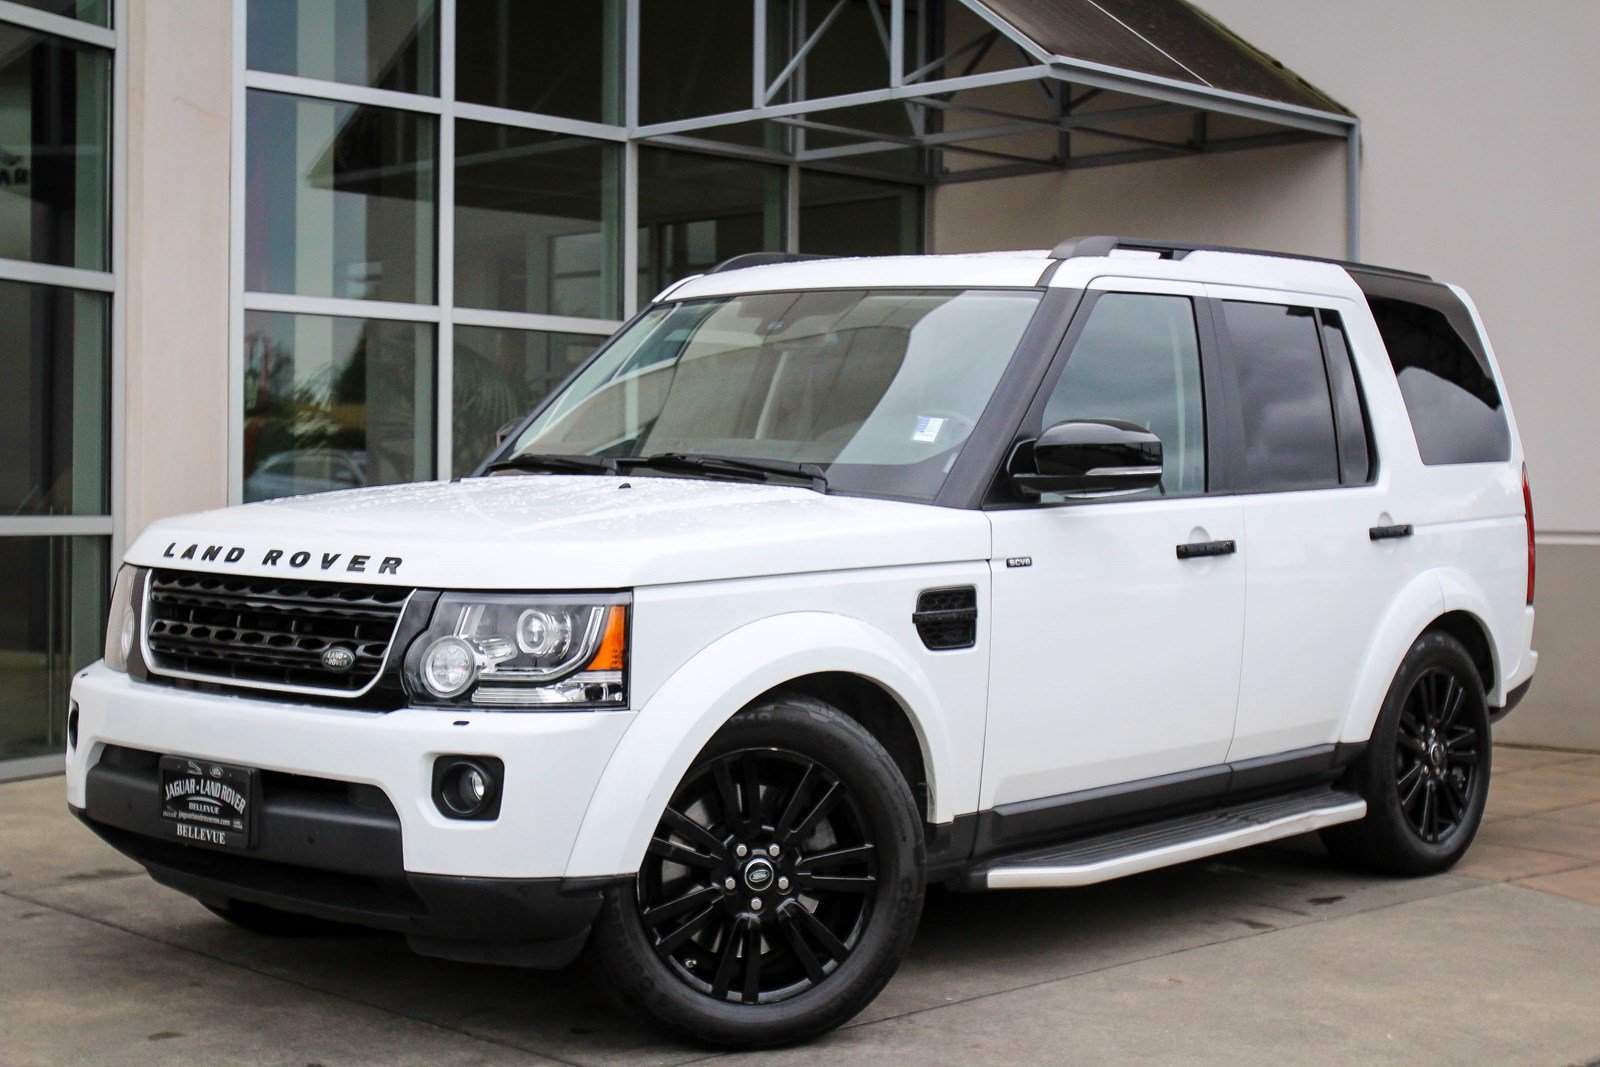 Certified PreOwned 2016 Land Rover LR4 HSE LUX Sport